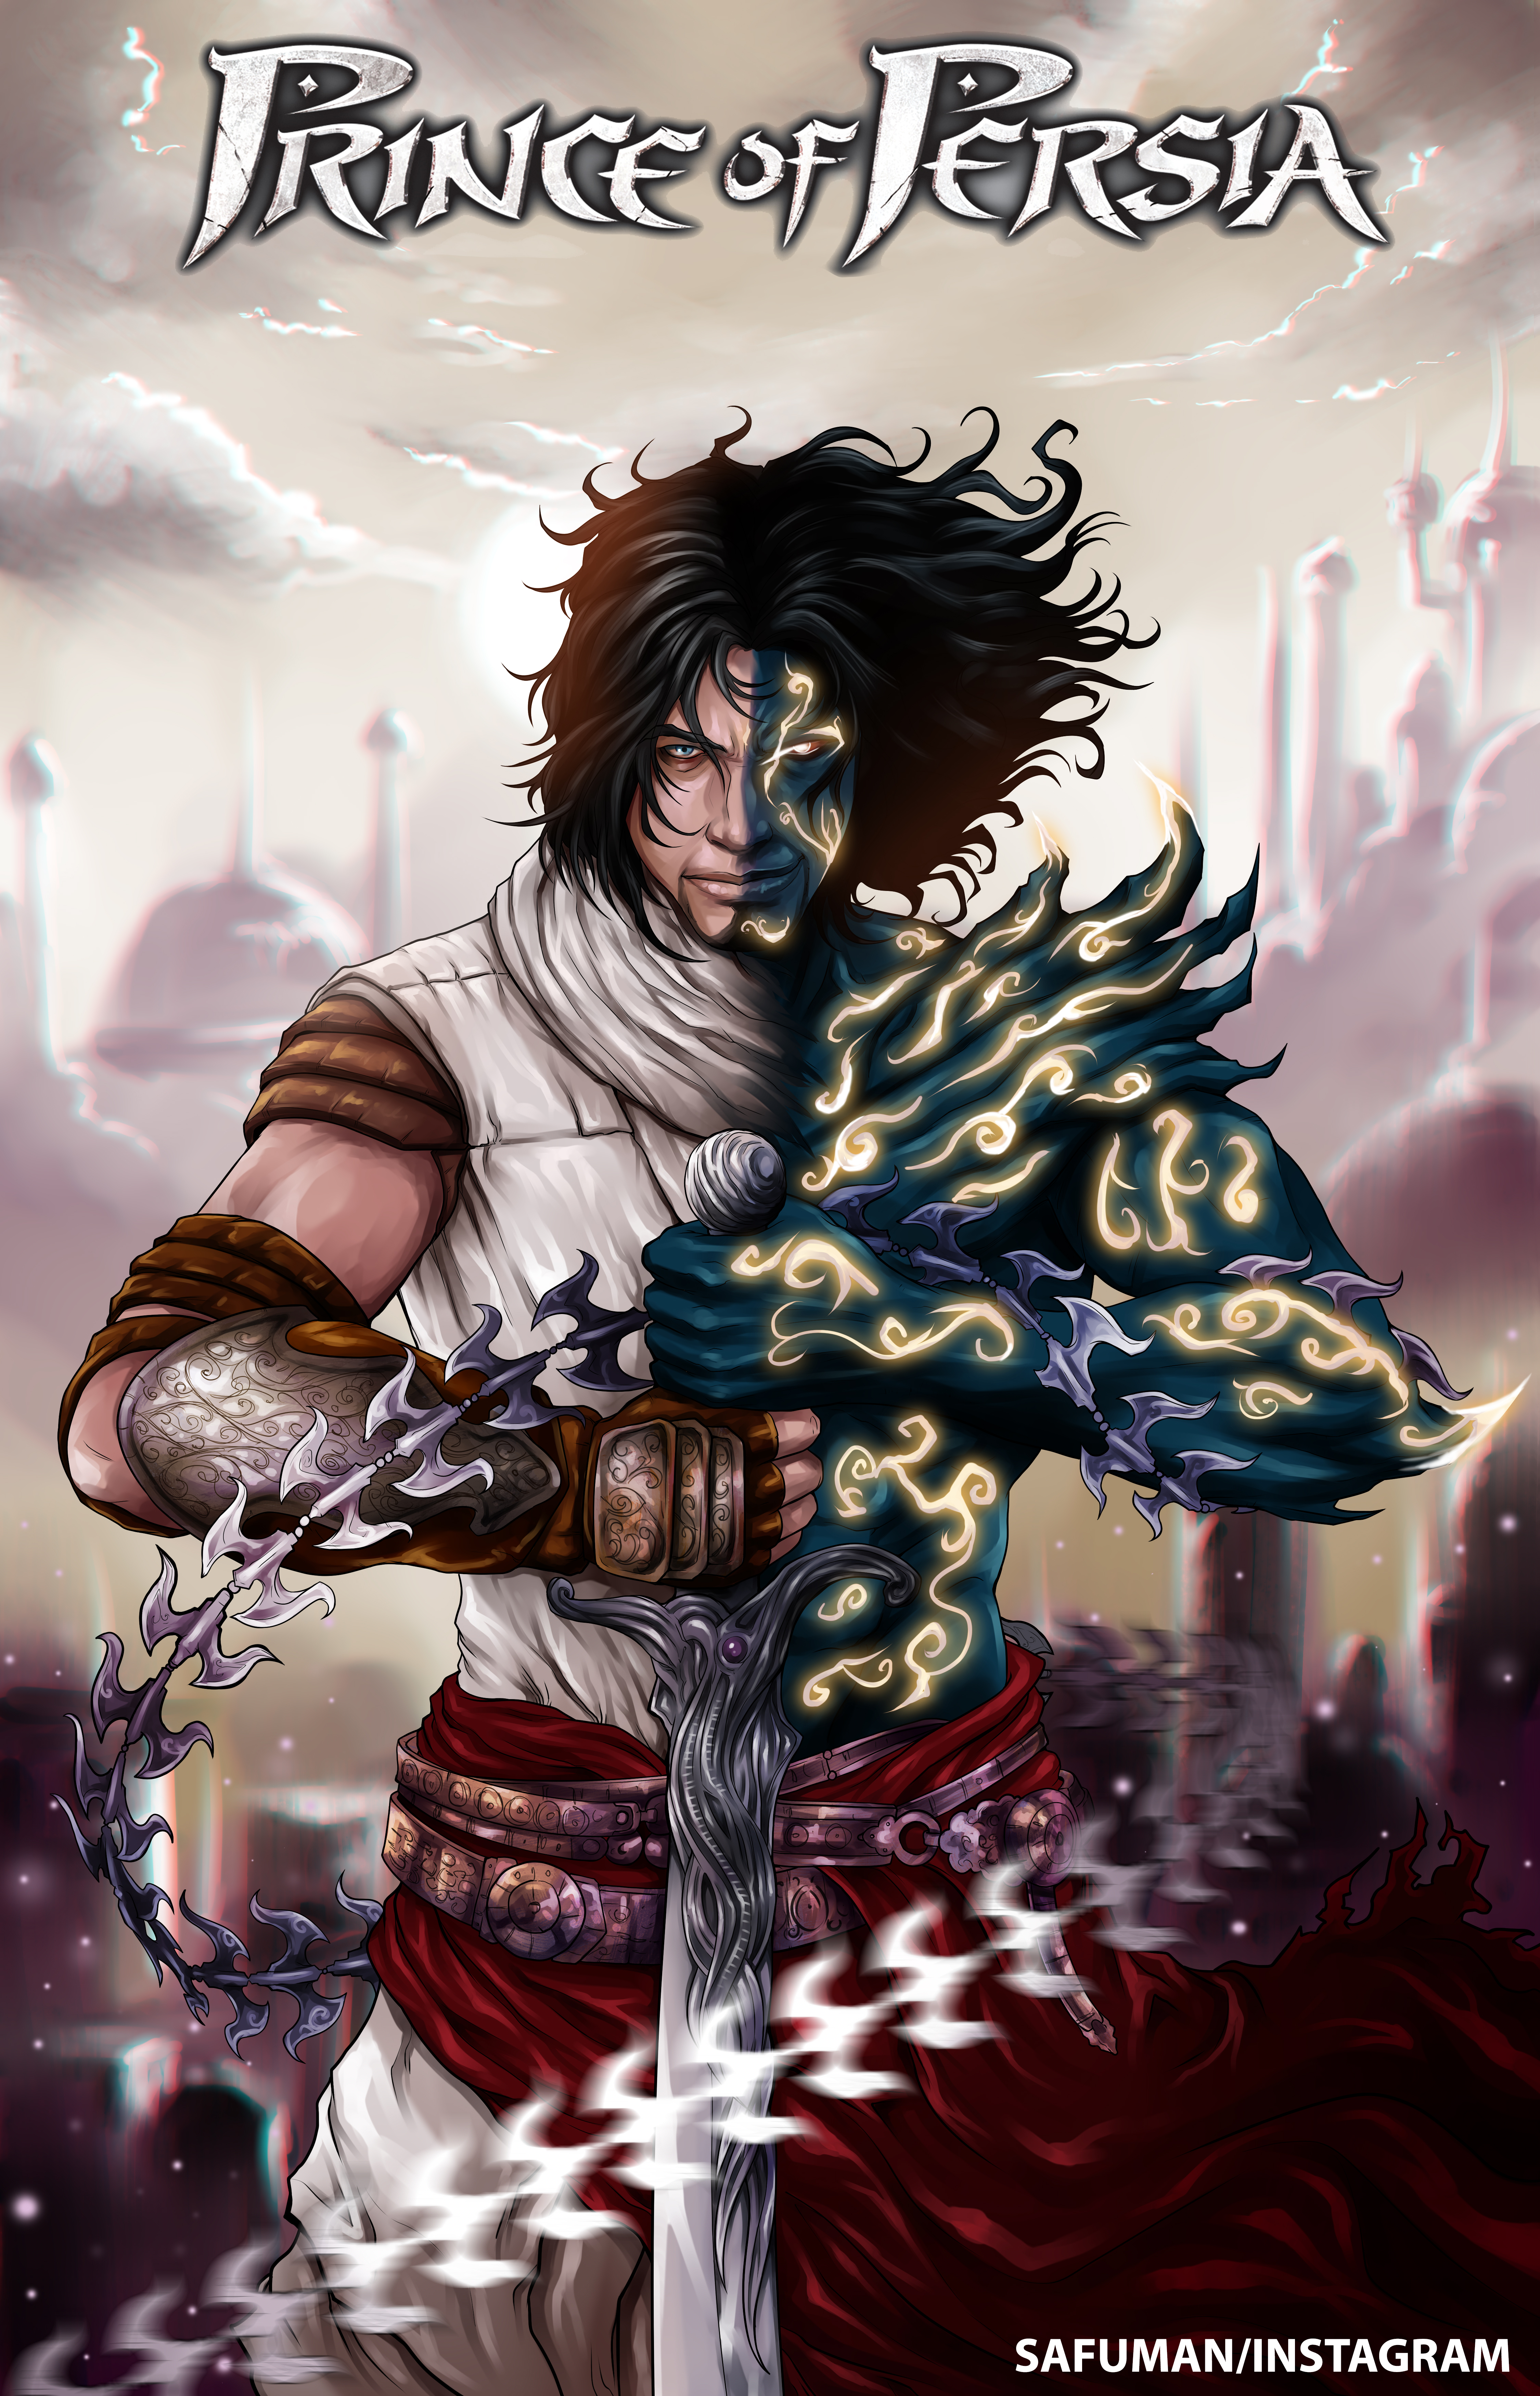 Prince-of-persia-the-two-thrones-colour by sahuman on DeviantArt